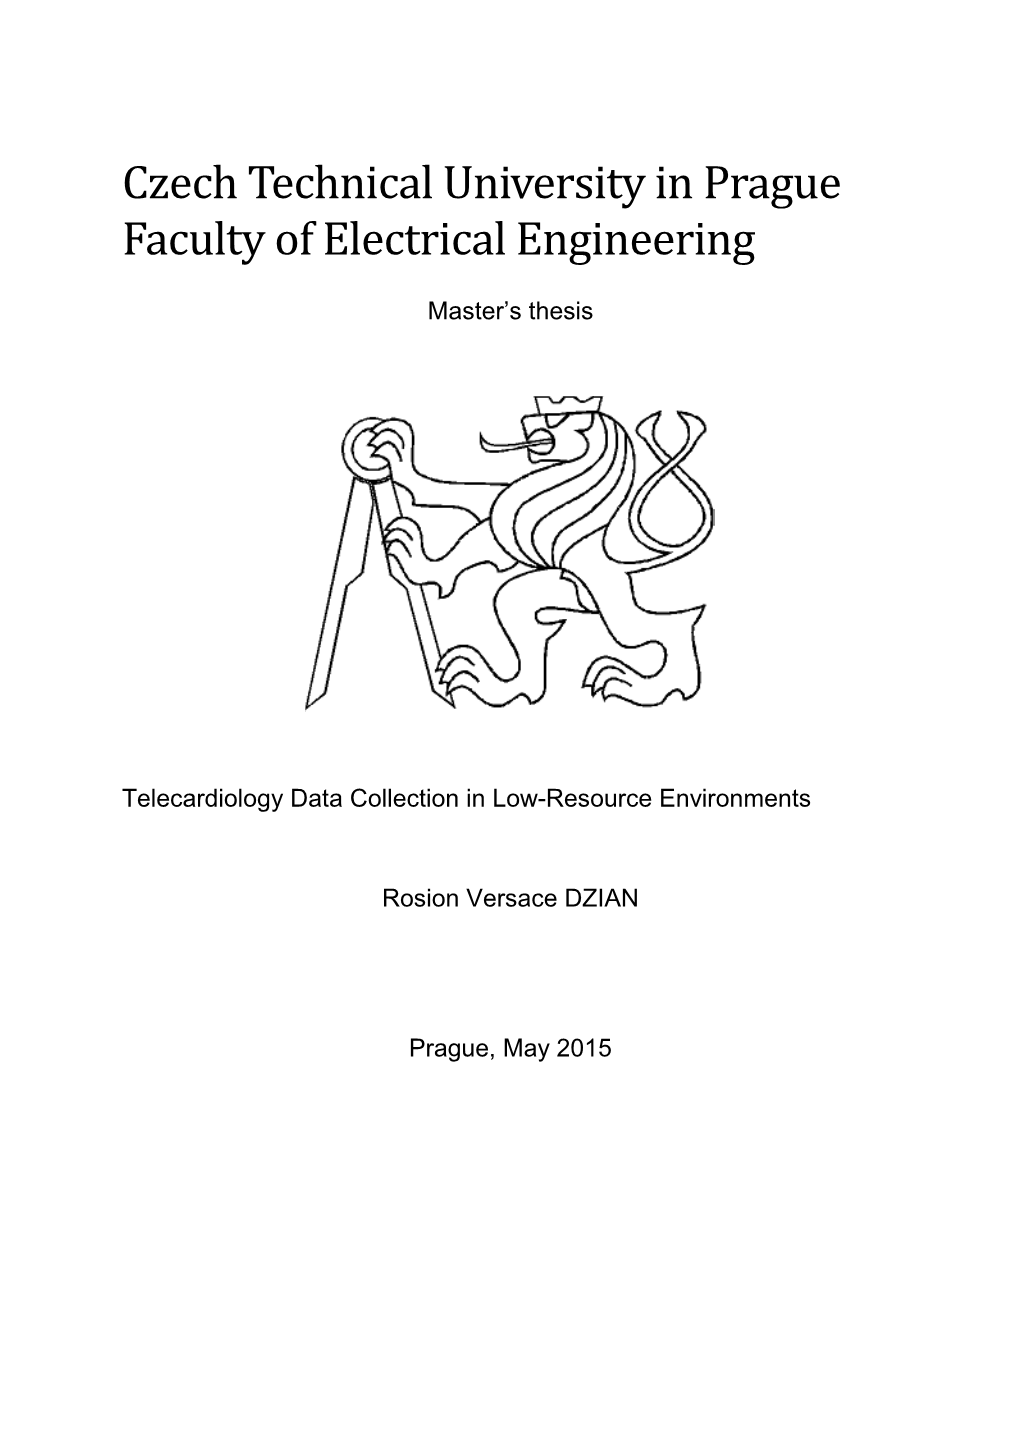 Czech Technical University in Prague Faculty of Electrical Engineering